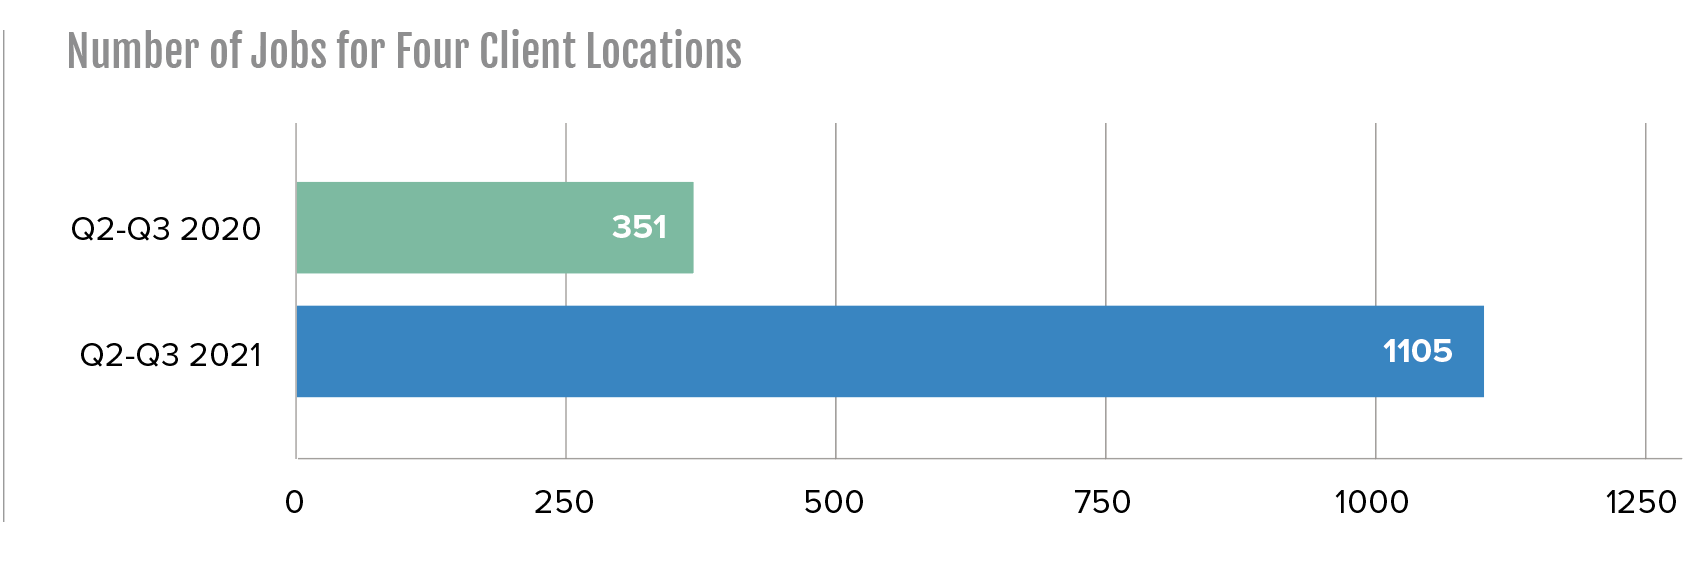 total number of jobs for 4 client locations